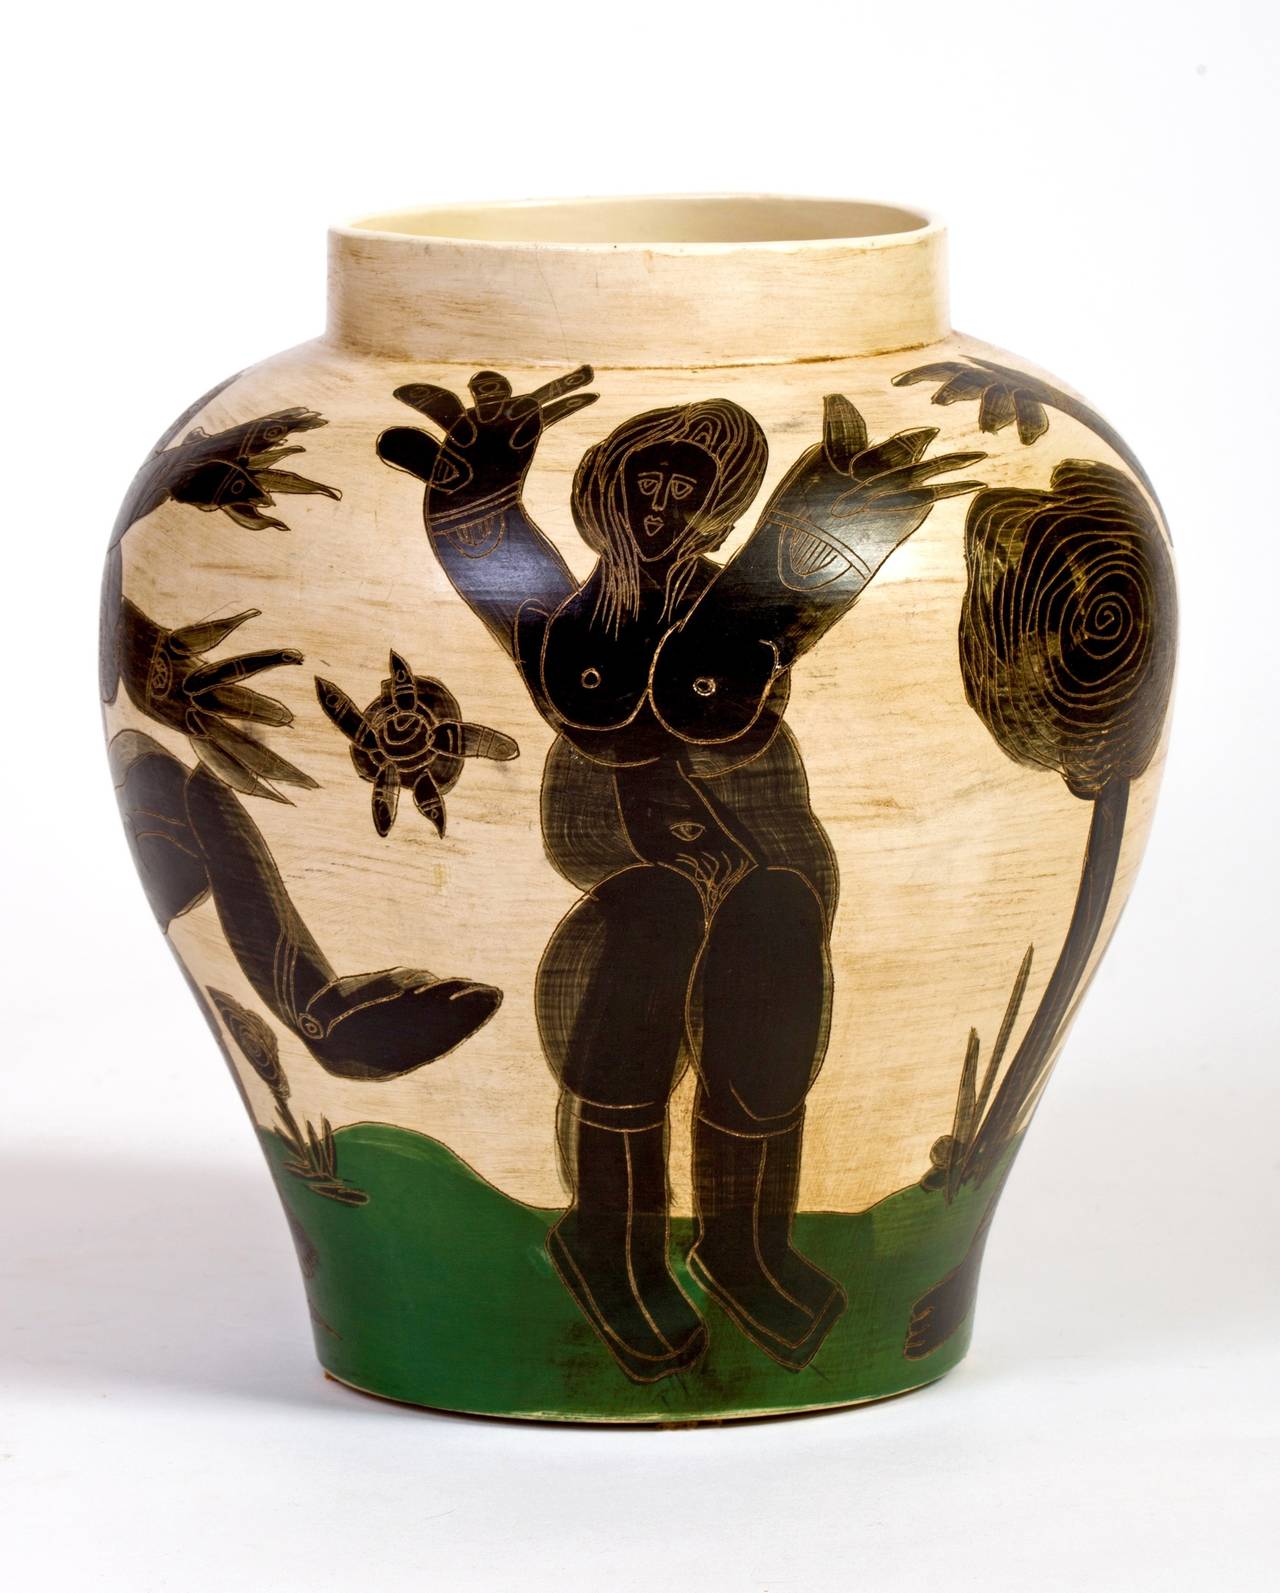 Fabulous, early example of Washington Ledesma's sculptural ceramic work at it's best...four nude women dancing with the snake in the Garden of Eden, circa 1978. He is considered to be one of Latin America's most significant artists living in the